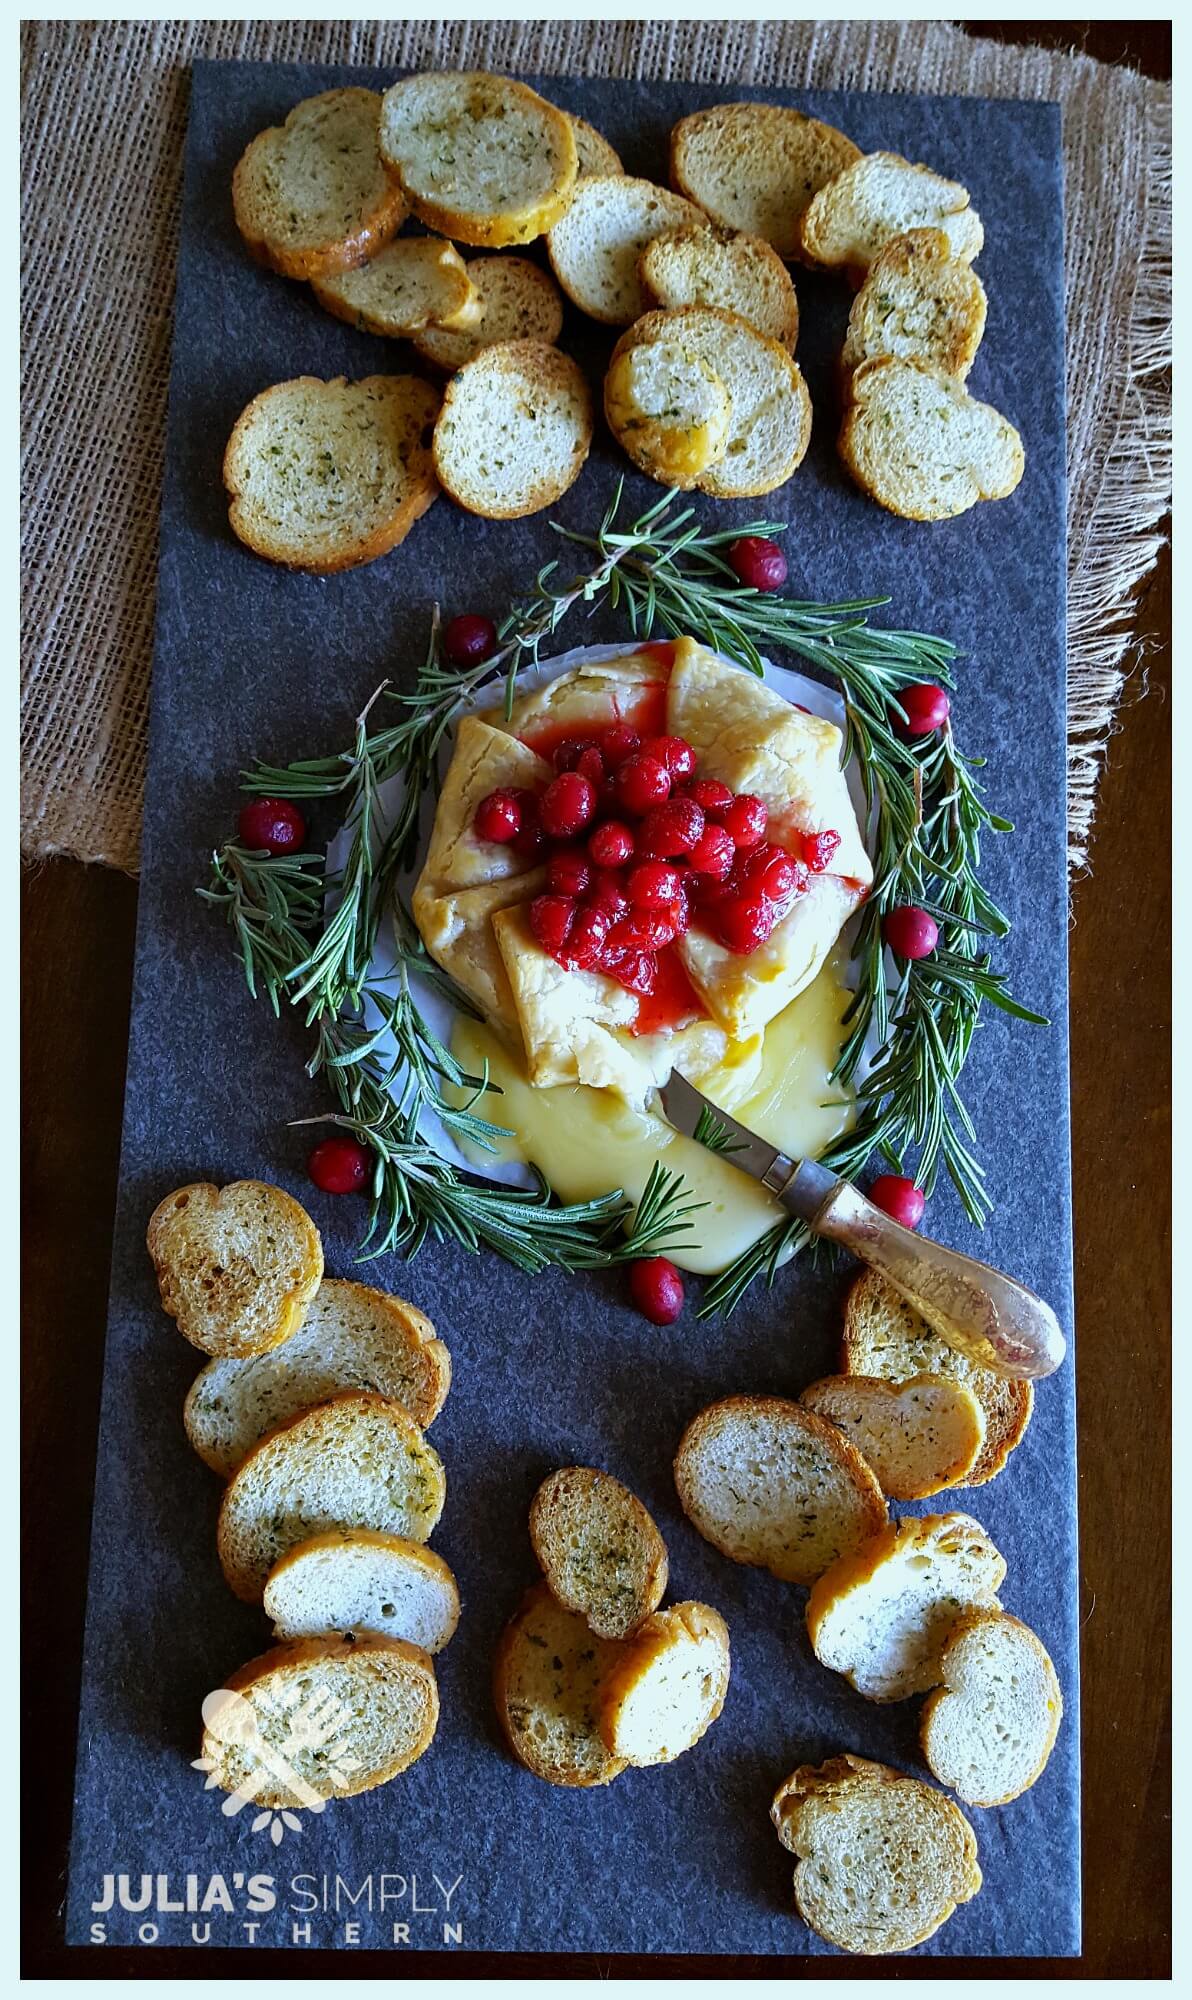 Baked brie in pie crust with fresh cranberry sauce for Christmas served with crostini bread - Holiday Brie en Croûte Recipe